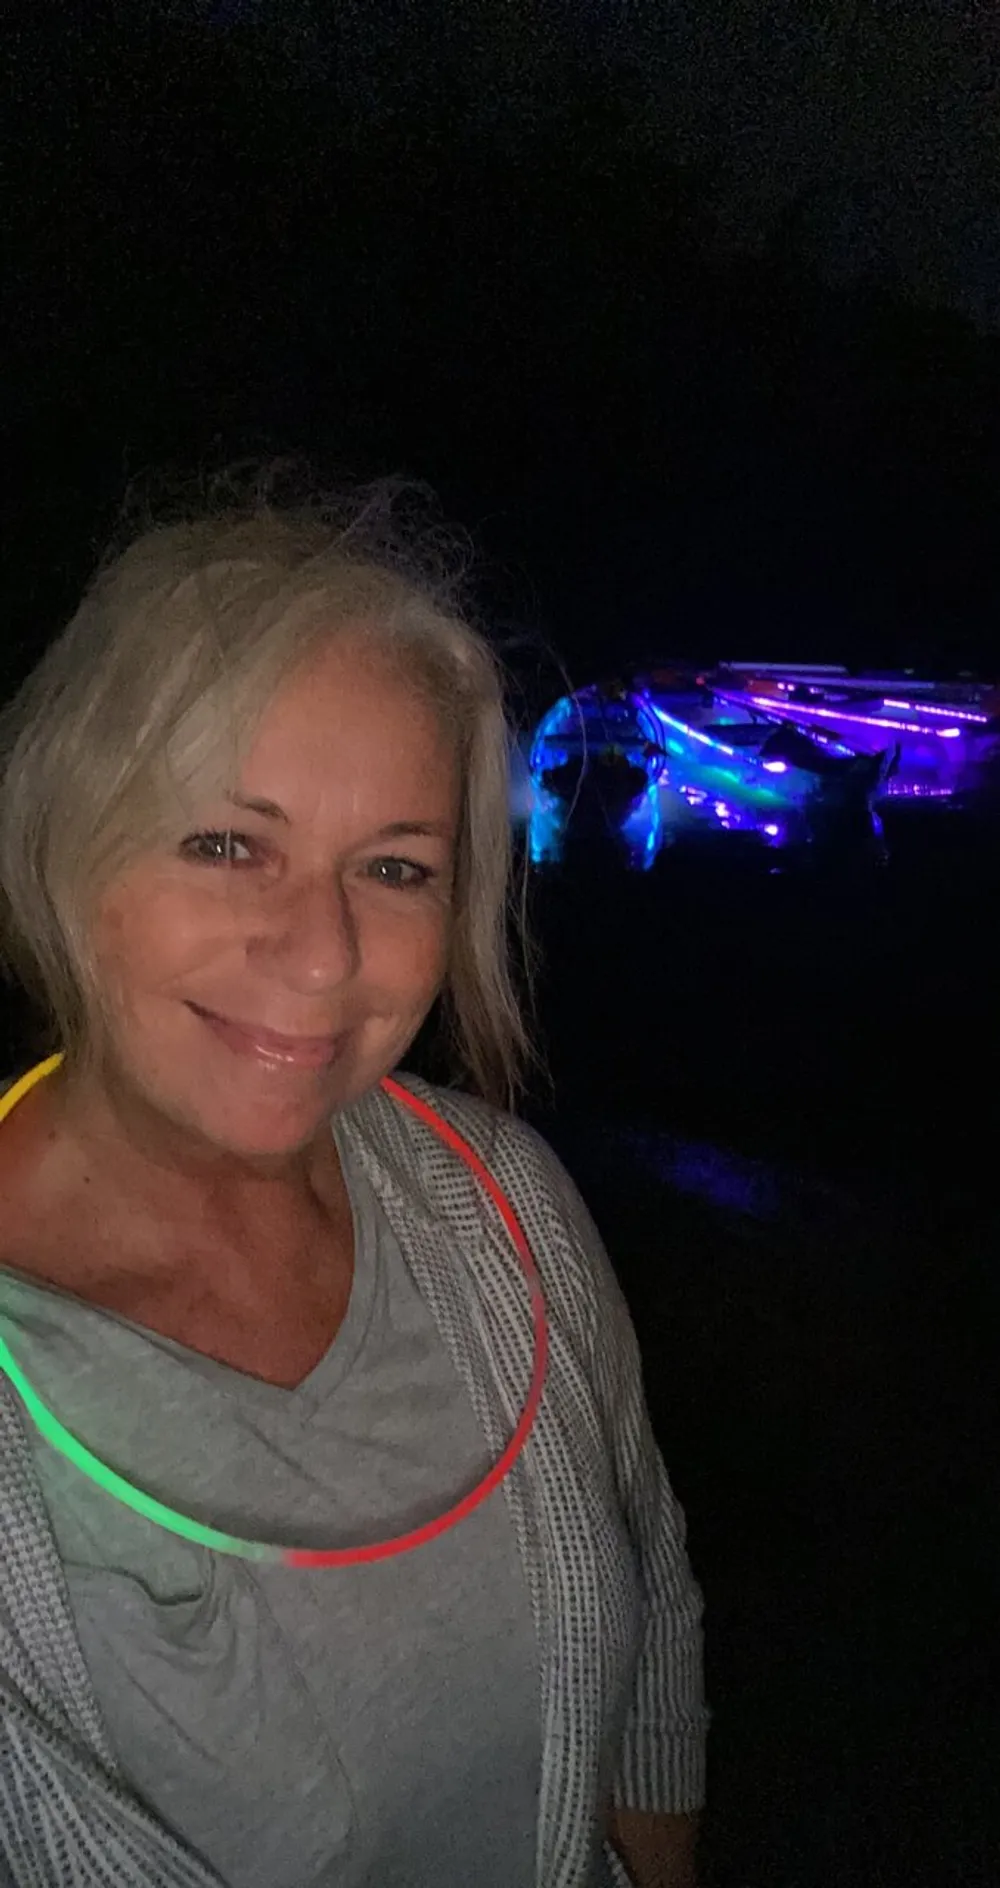 A smiling person is taking a selfie at night with colorful glowing lights in the background wearing a glow necklace